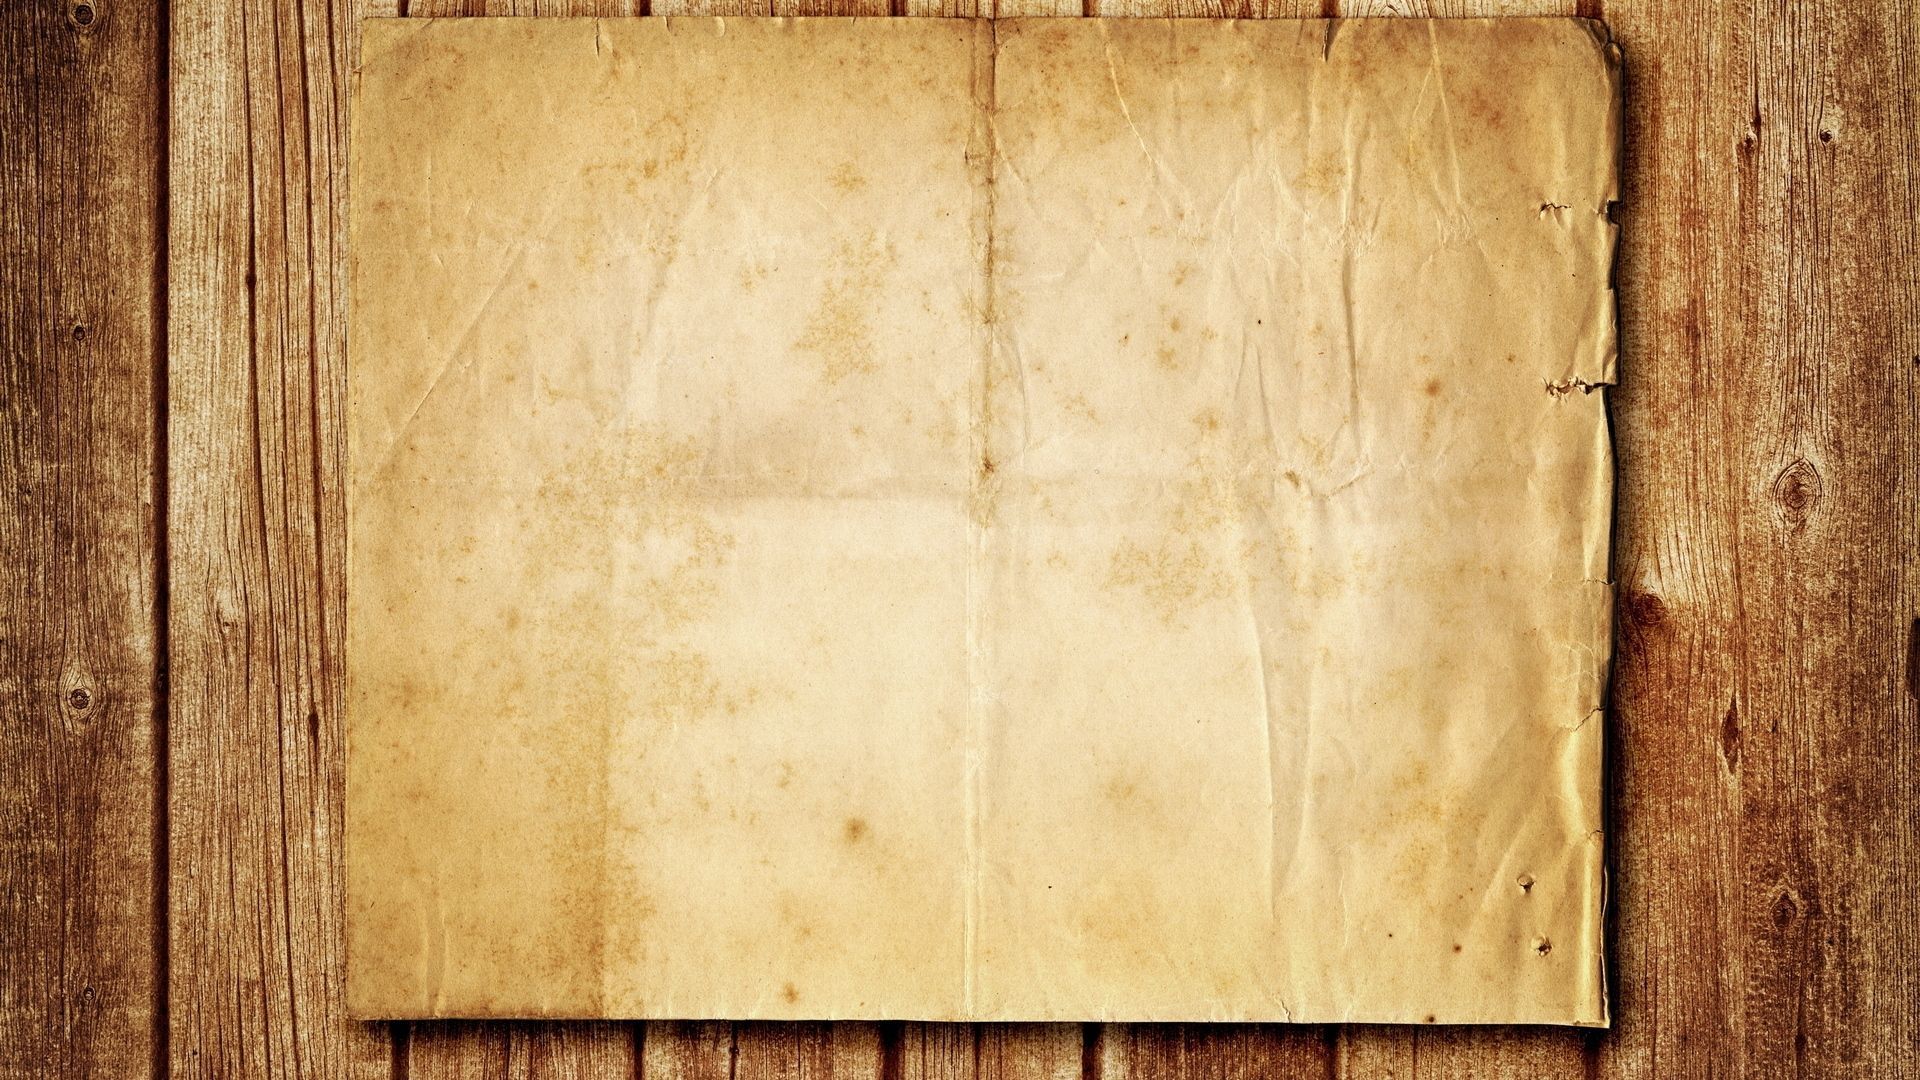 Download Wallpaper 1920x1080 Wood, Paper, Background, surface ...